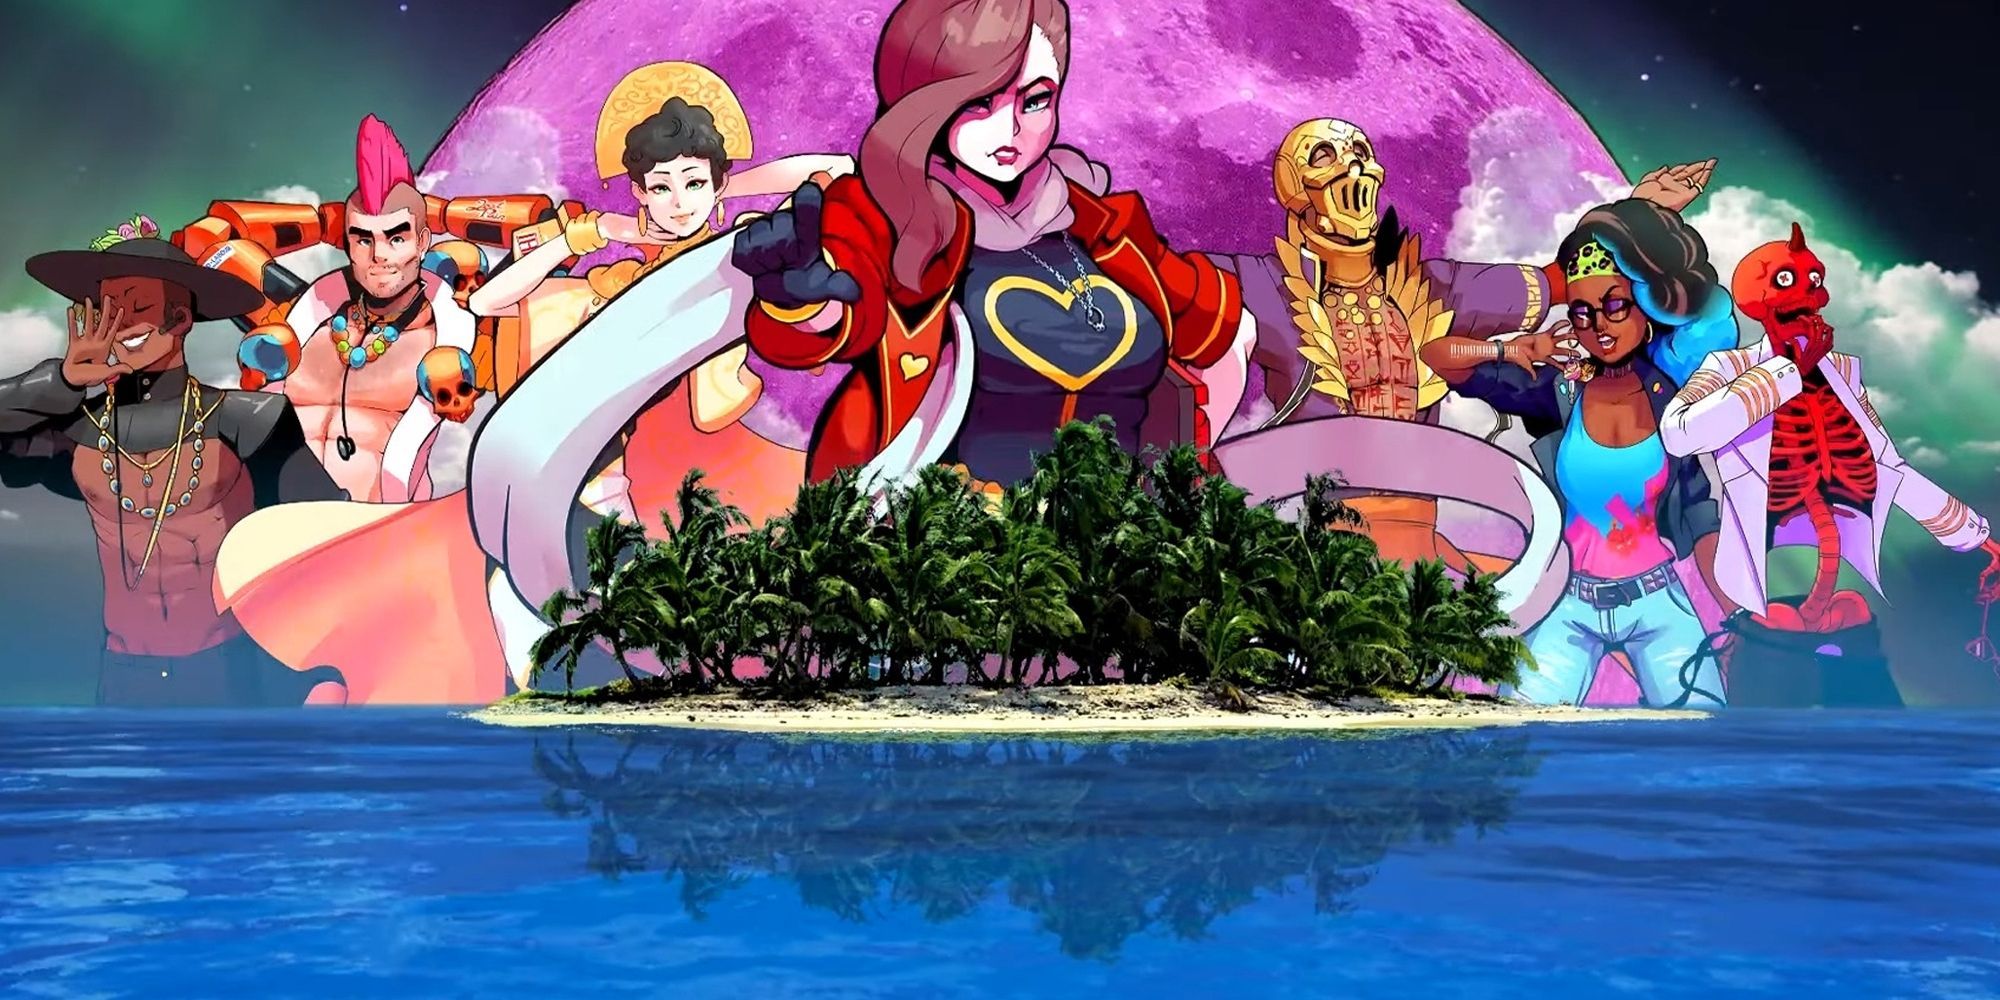 Paradise Killer Cast Stands Over Paradise Island With Purple Moon Behind Them